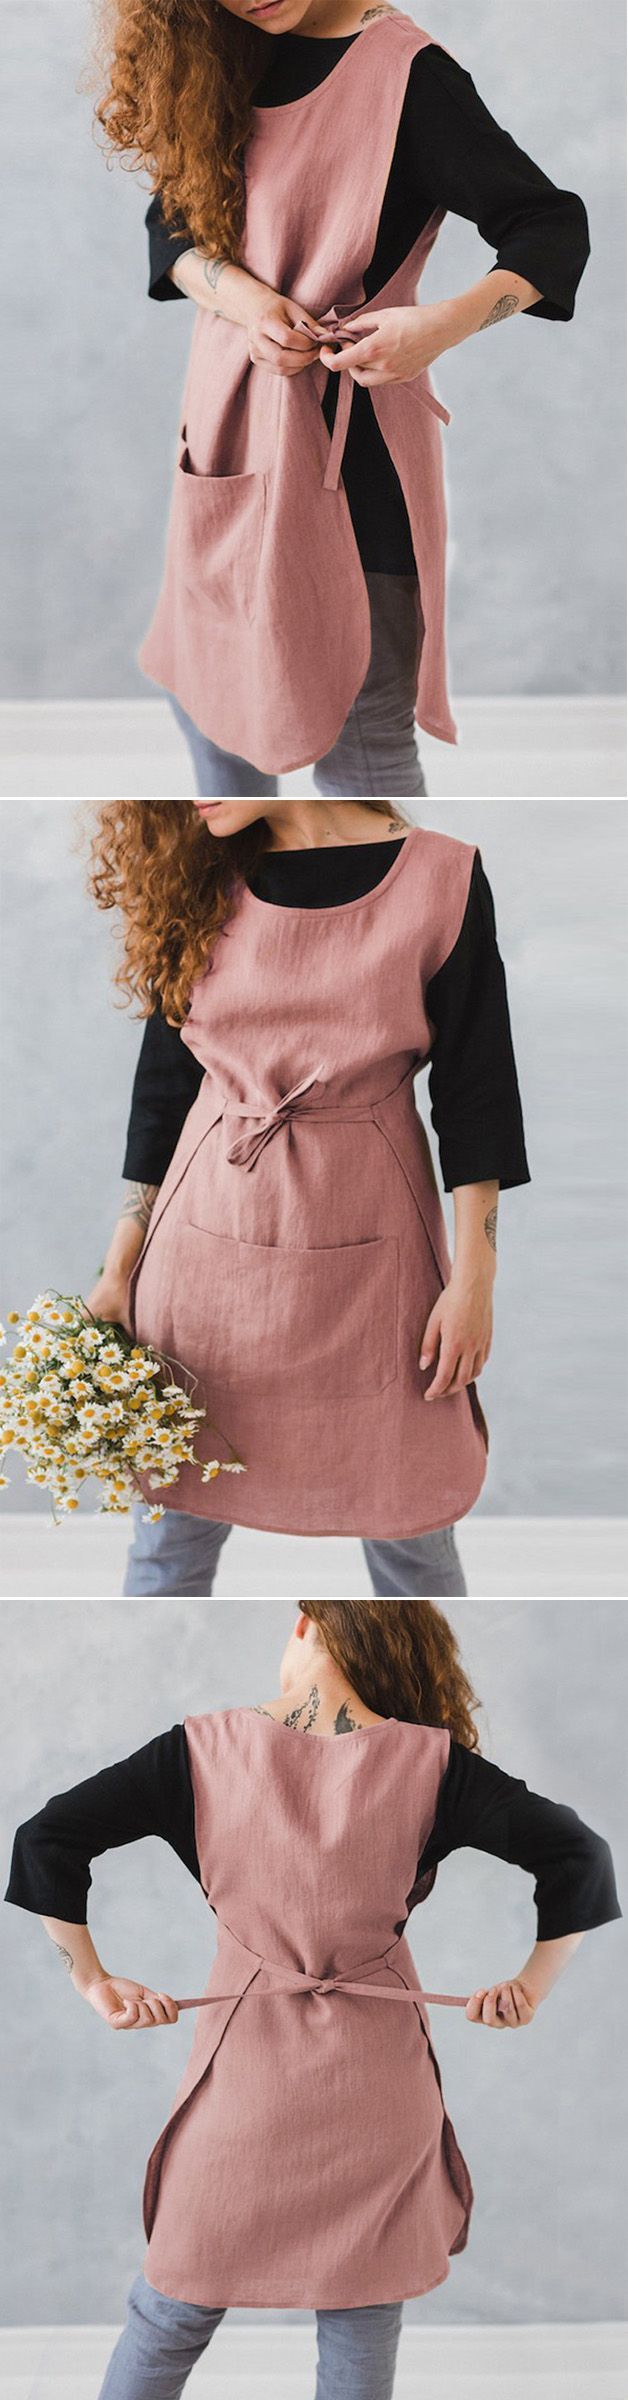 US$16.99 65% Women Sleeveless Pocket Cotton Solid Color Vintage Apron Dress Women's Clothing from Clothing and Apparel on banggood.com -   25 crafts gifts teddy bears
 ideas